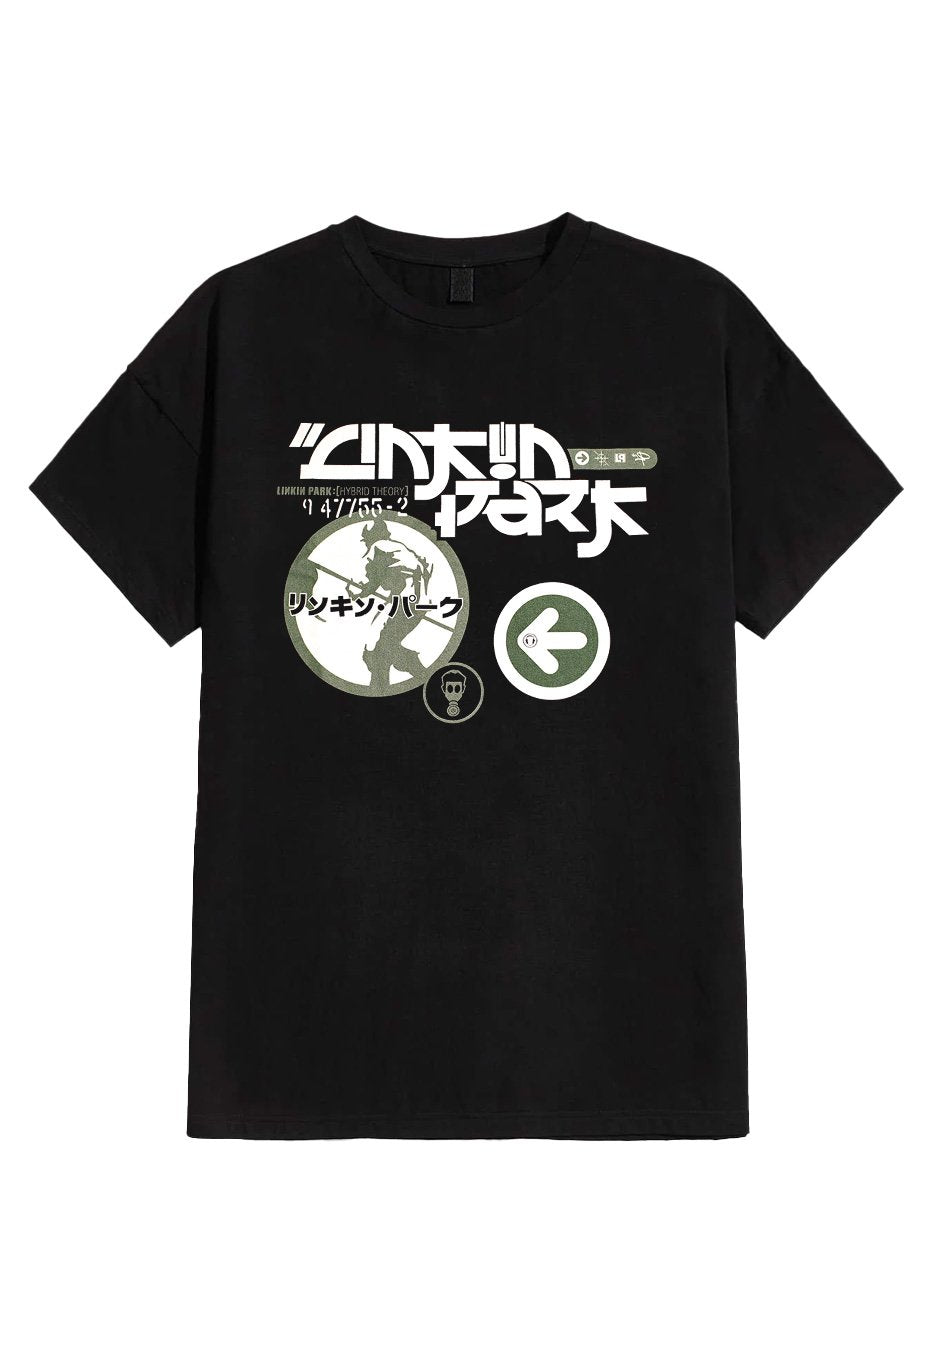 Linkin Park merch available online in the Nuclear Blast shop